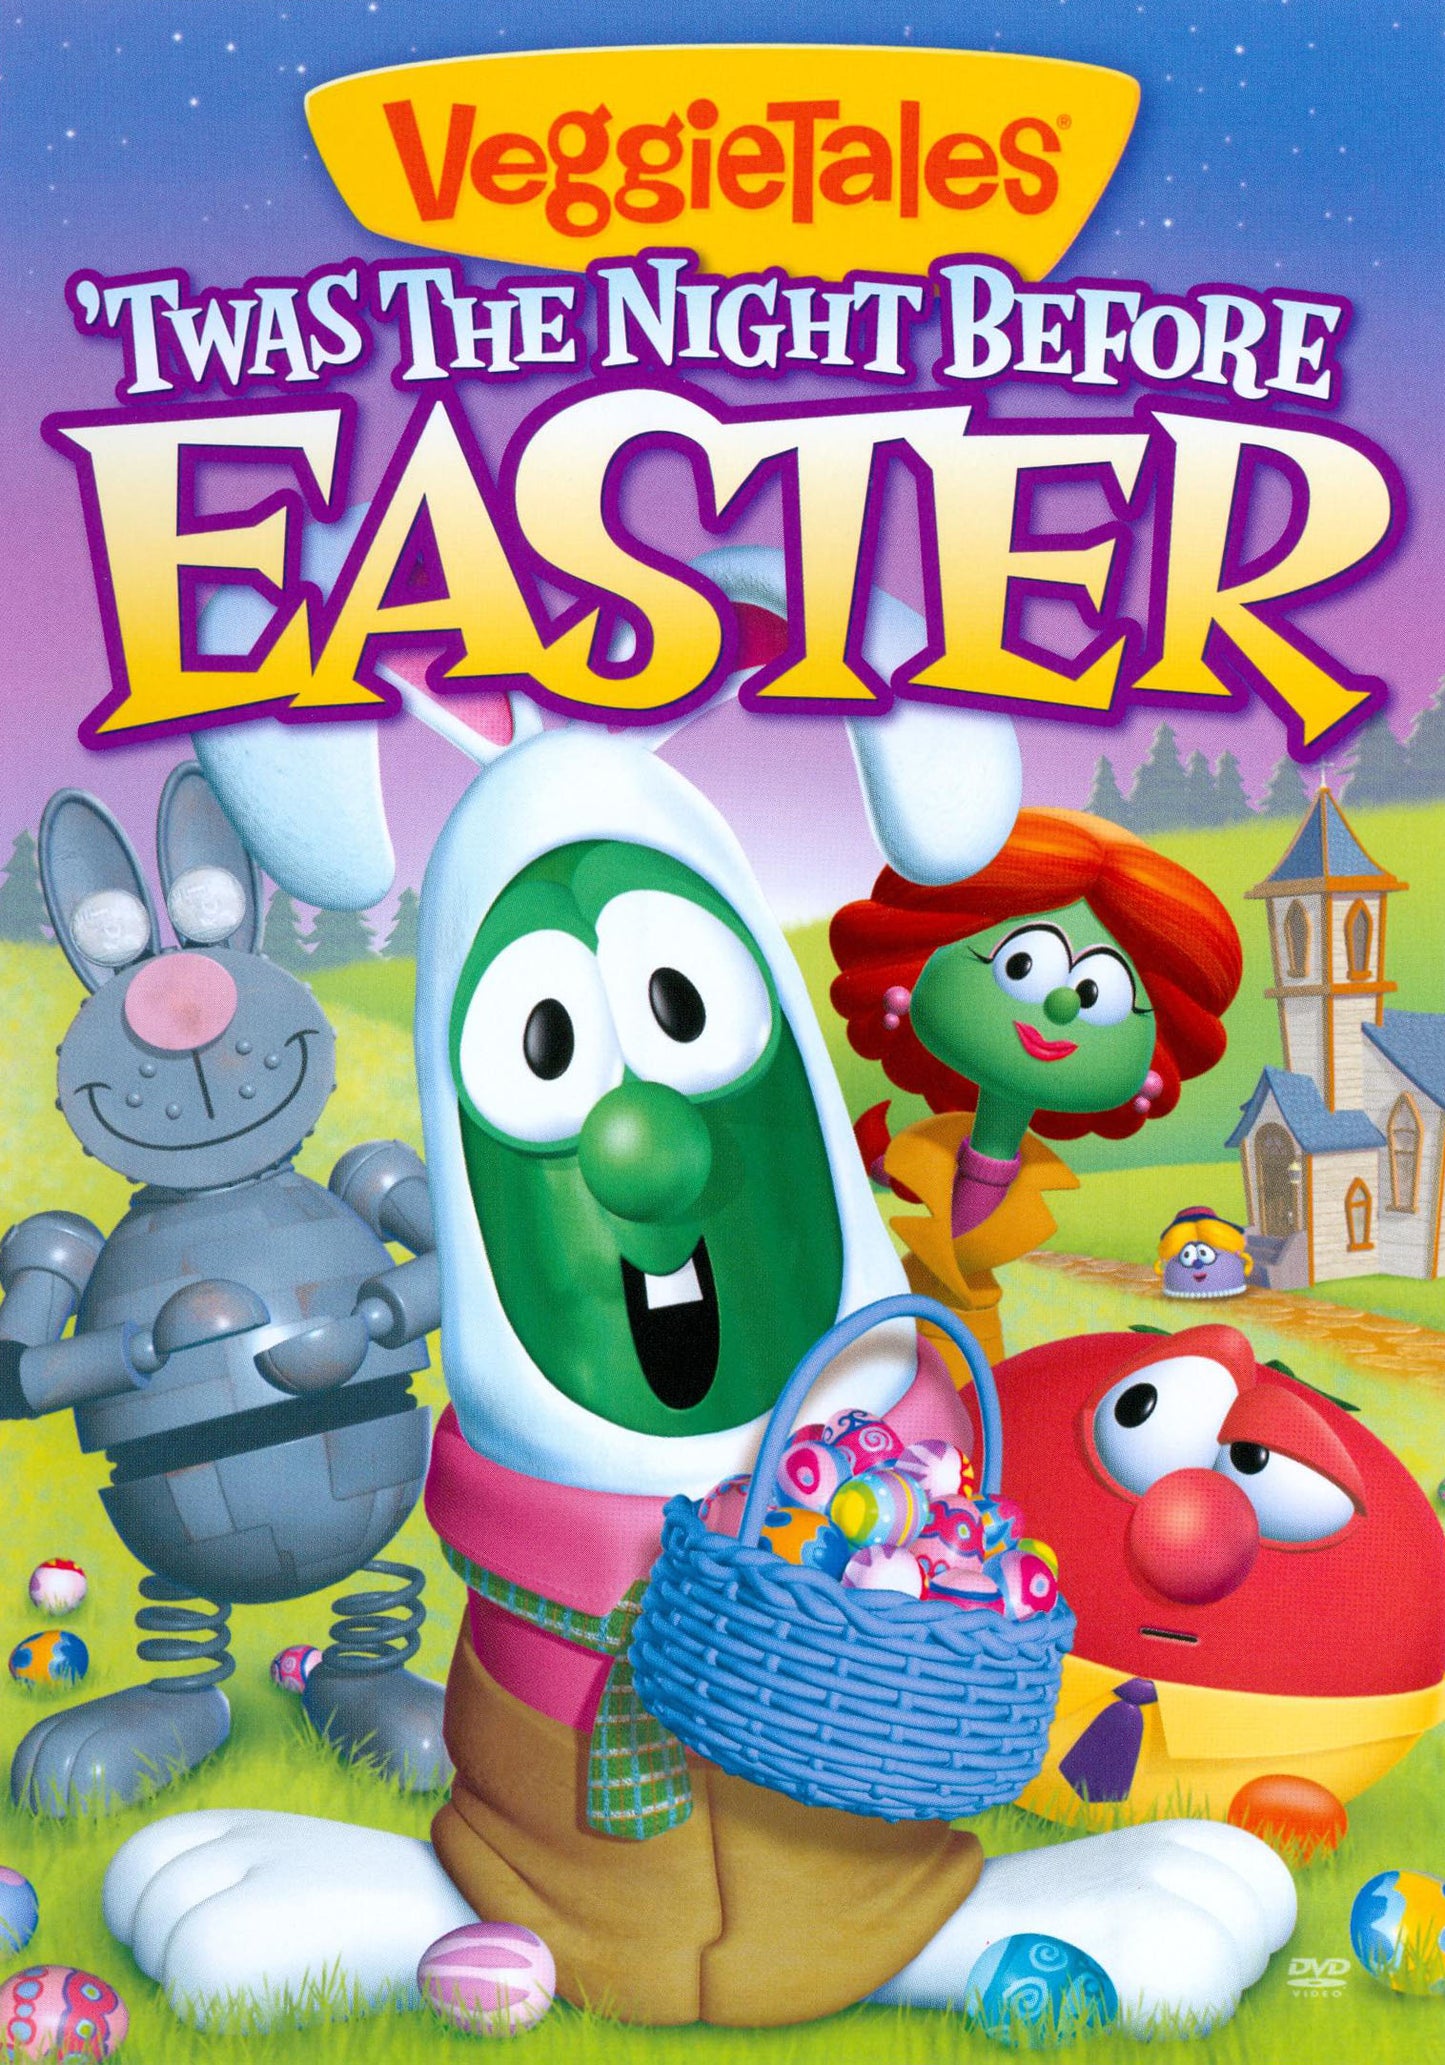 Veggie Tales: 'Twas the Night Before Easter cover art